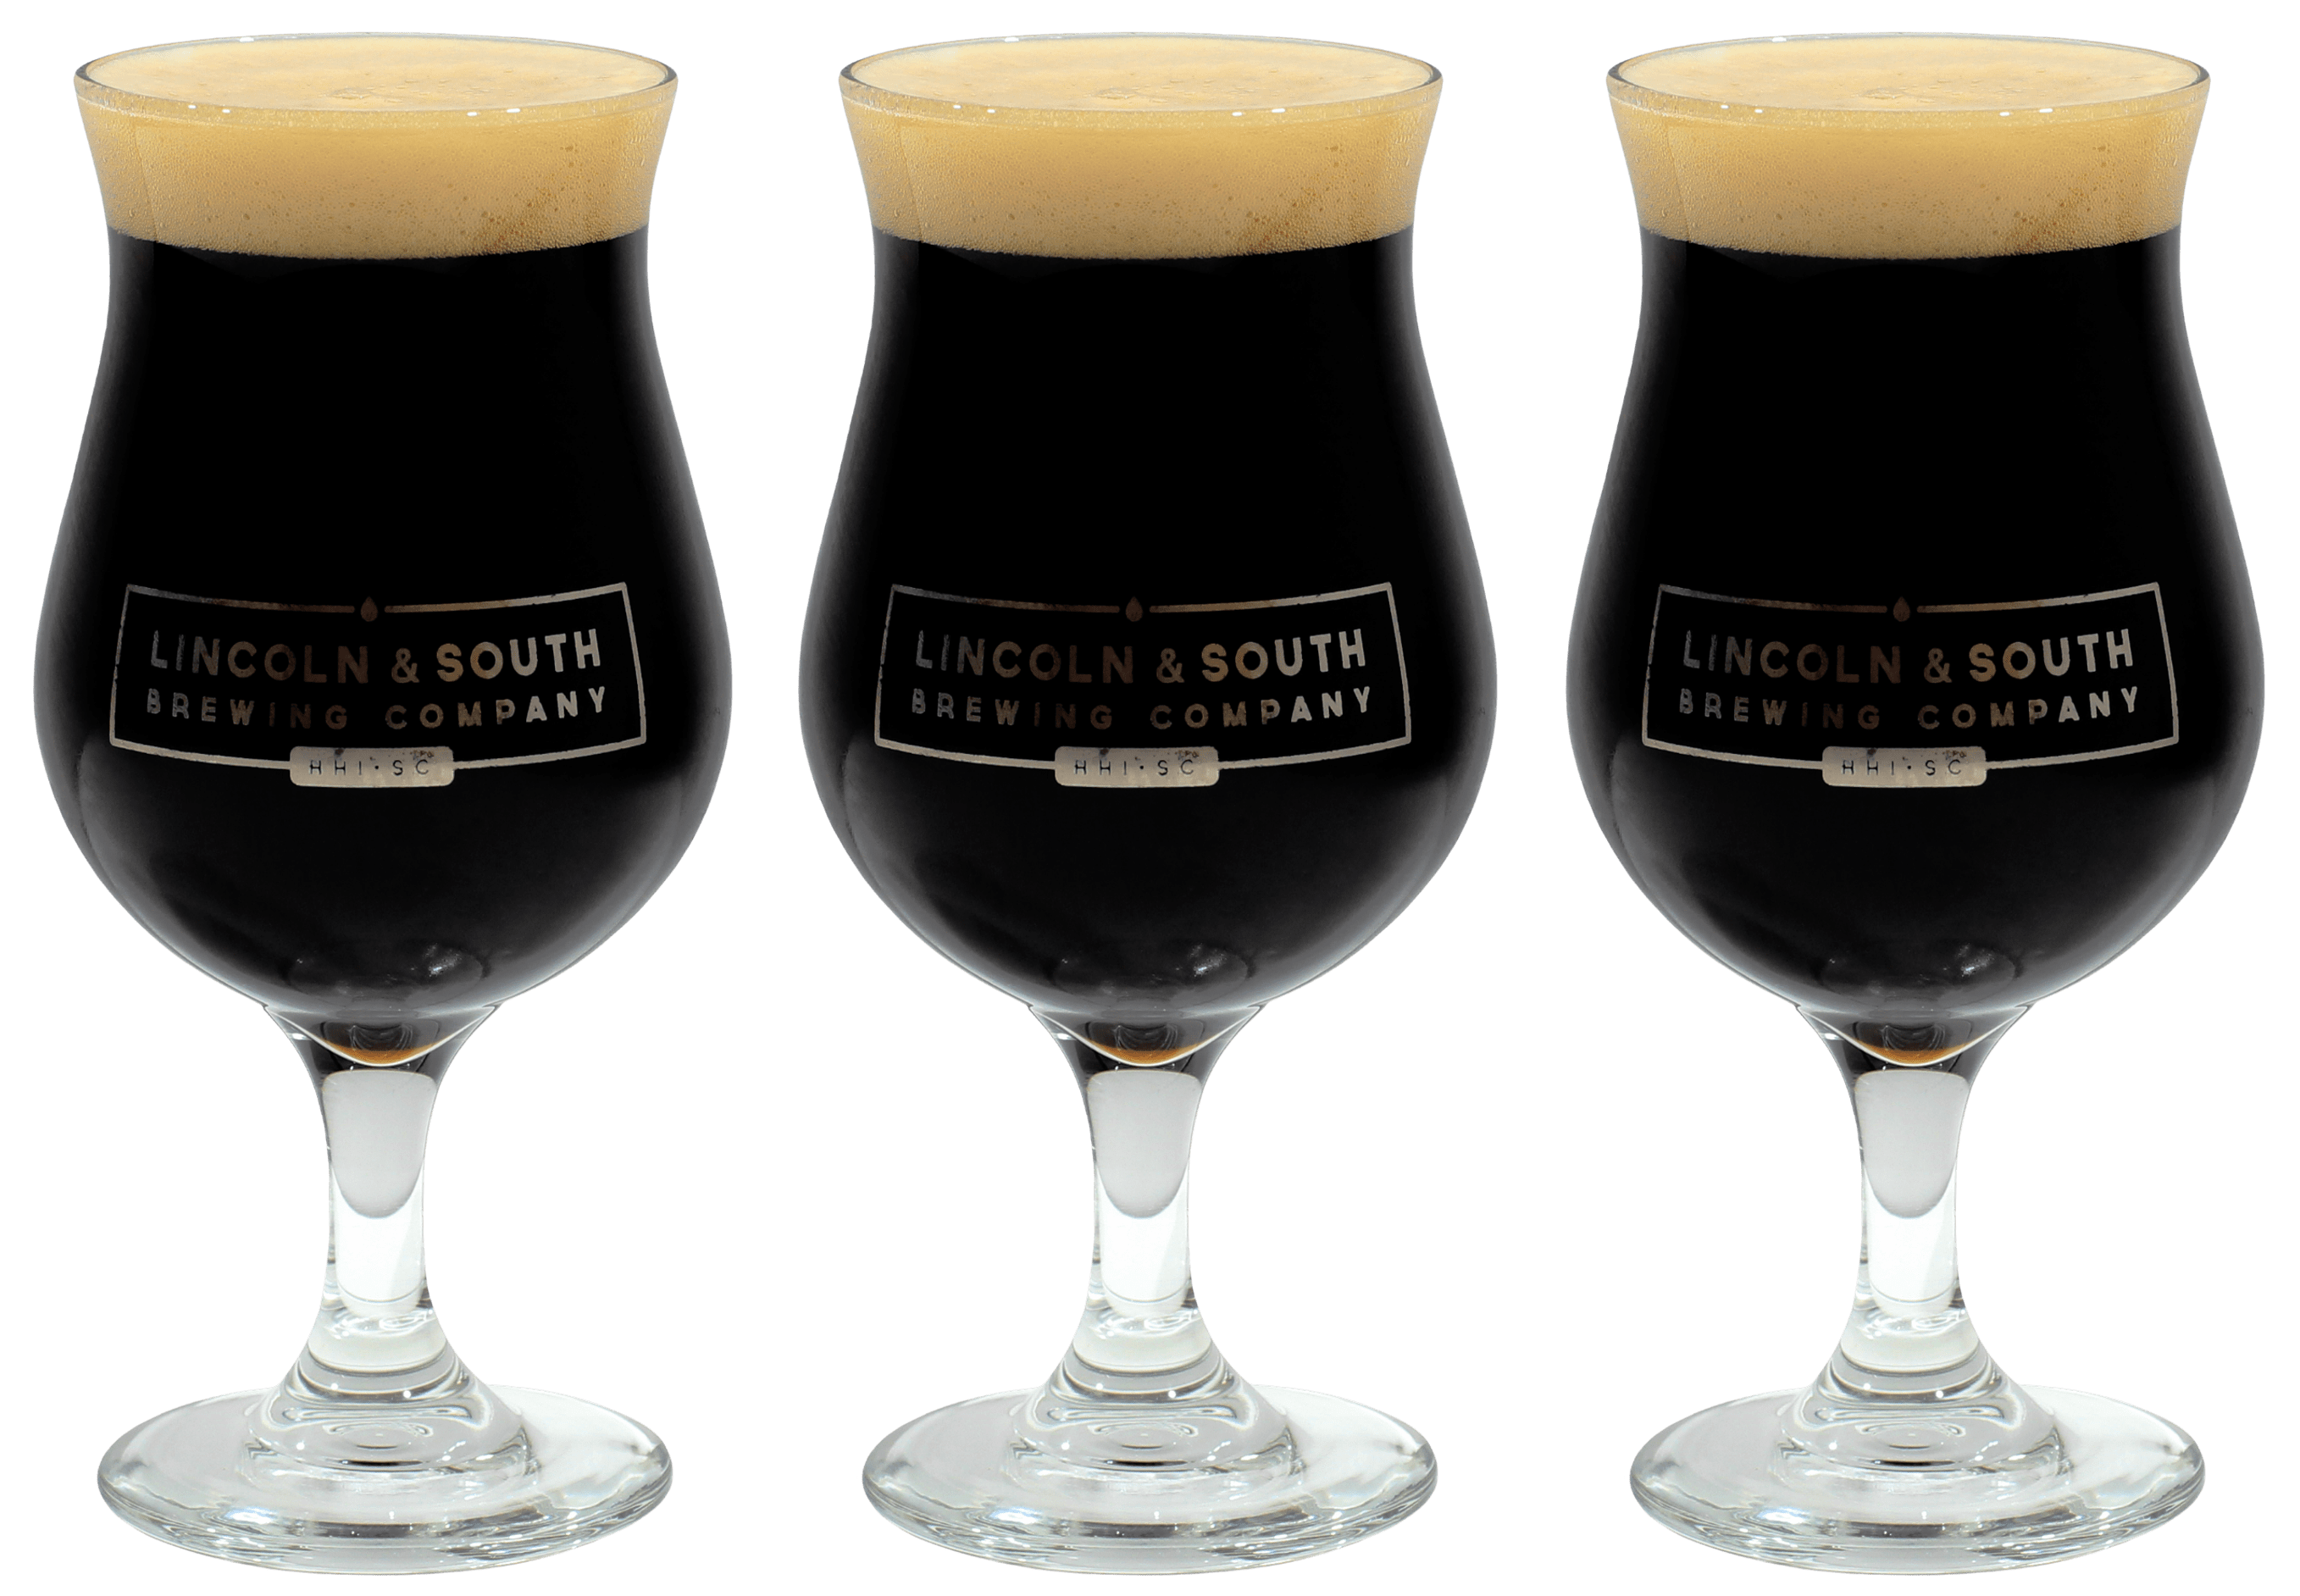 Hunker Down is an imperial stout offered by Lincoln & South Brewing Company on Hilton Head Island, SC